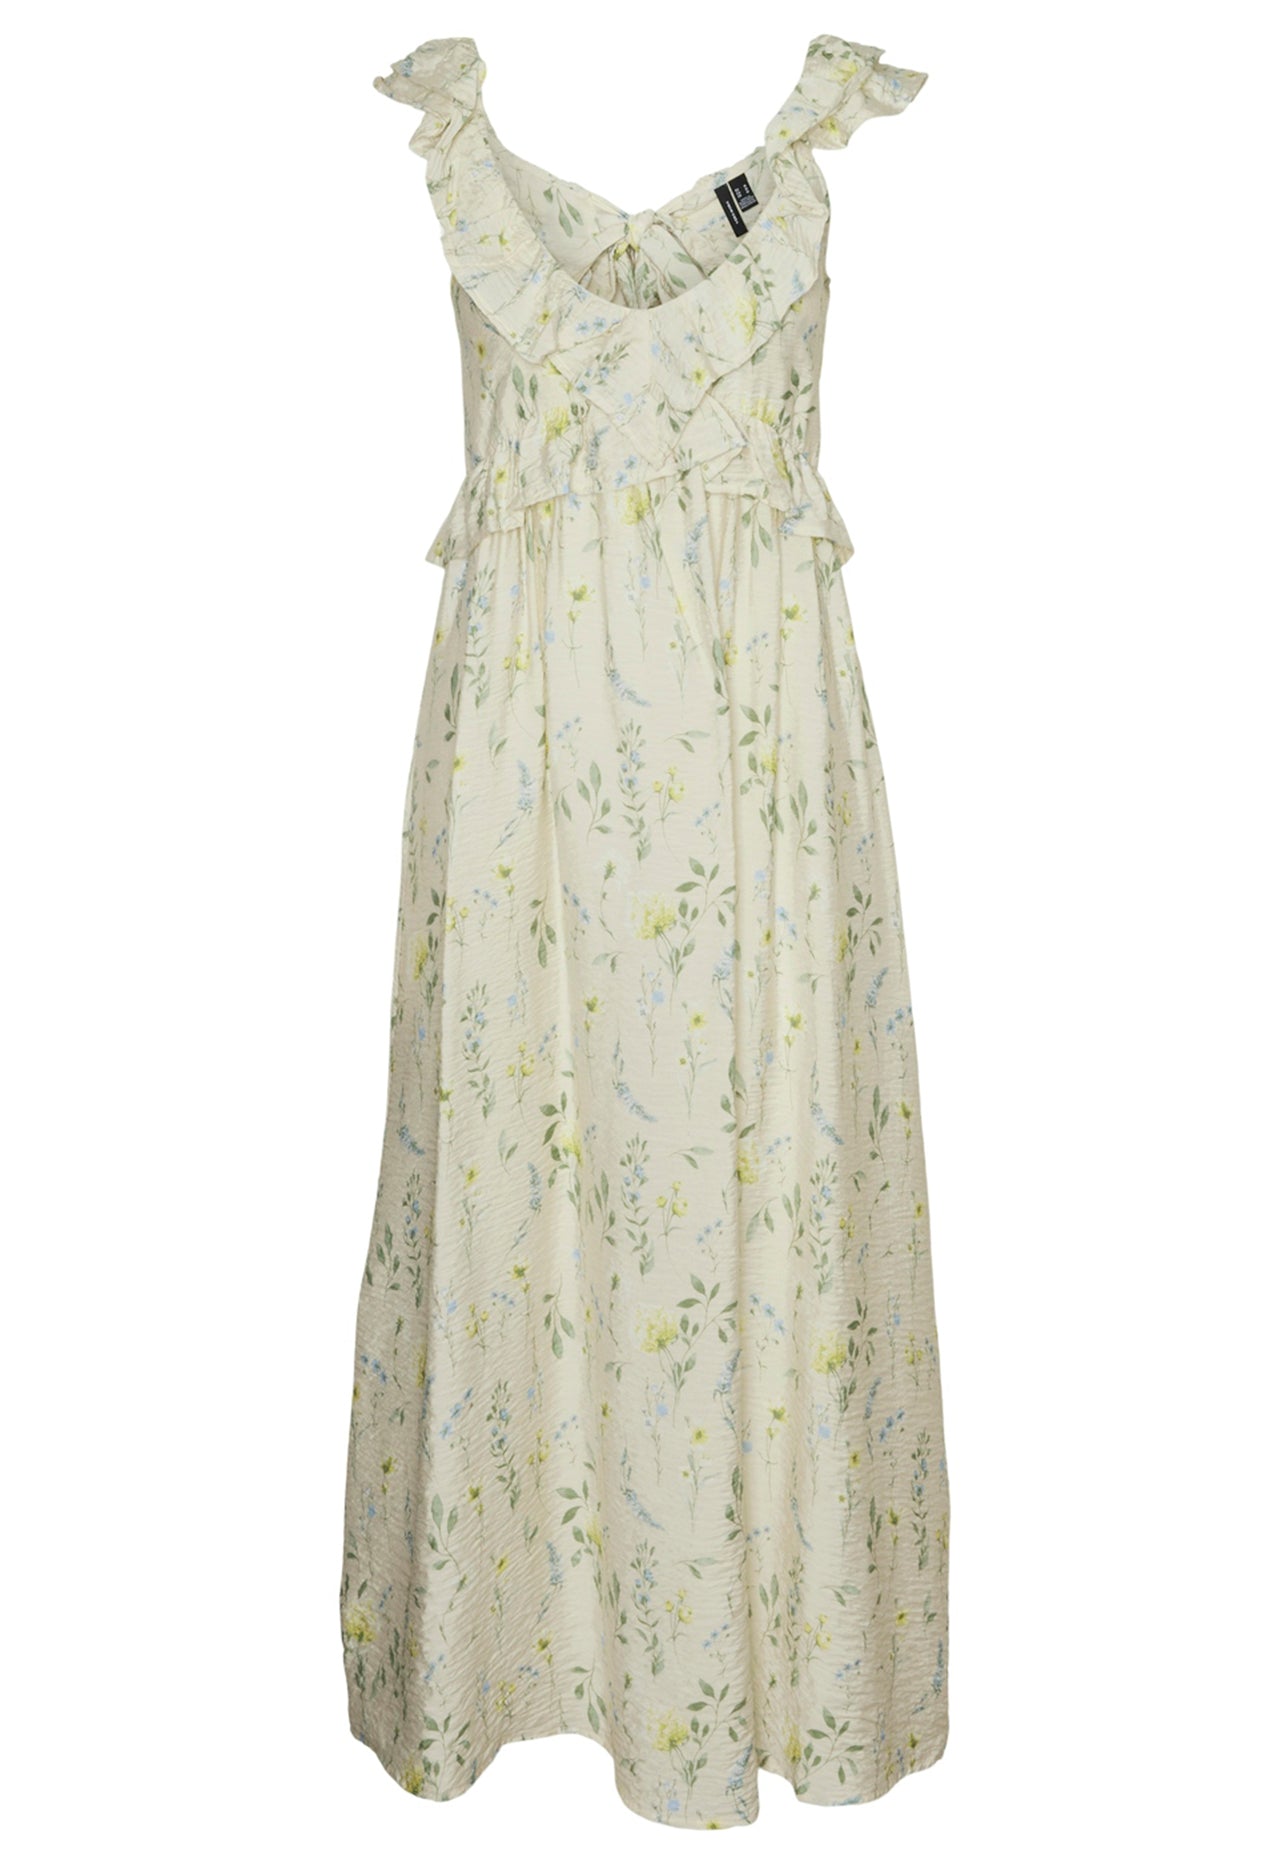 VERO MODA Josie Backless Floral Frill Detail Midi Dress in Soft Beige - One Nation Clothing